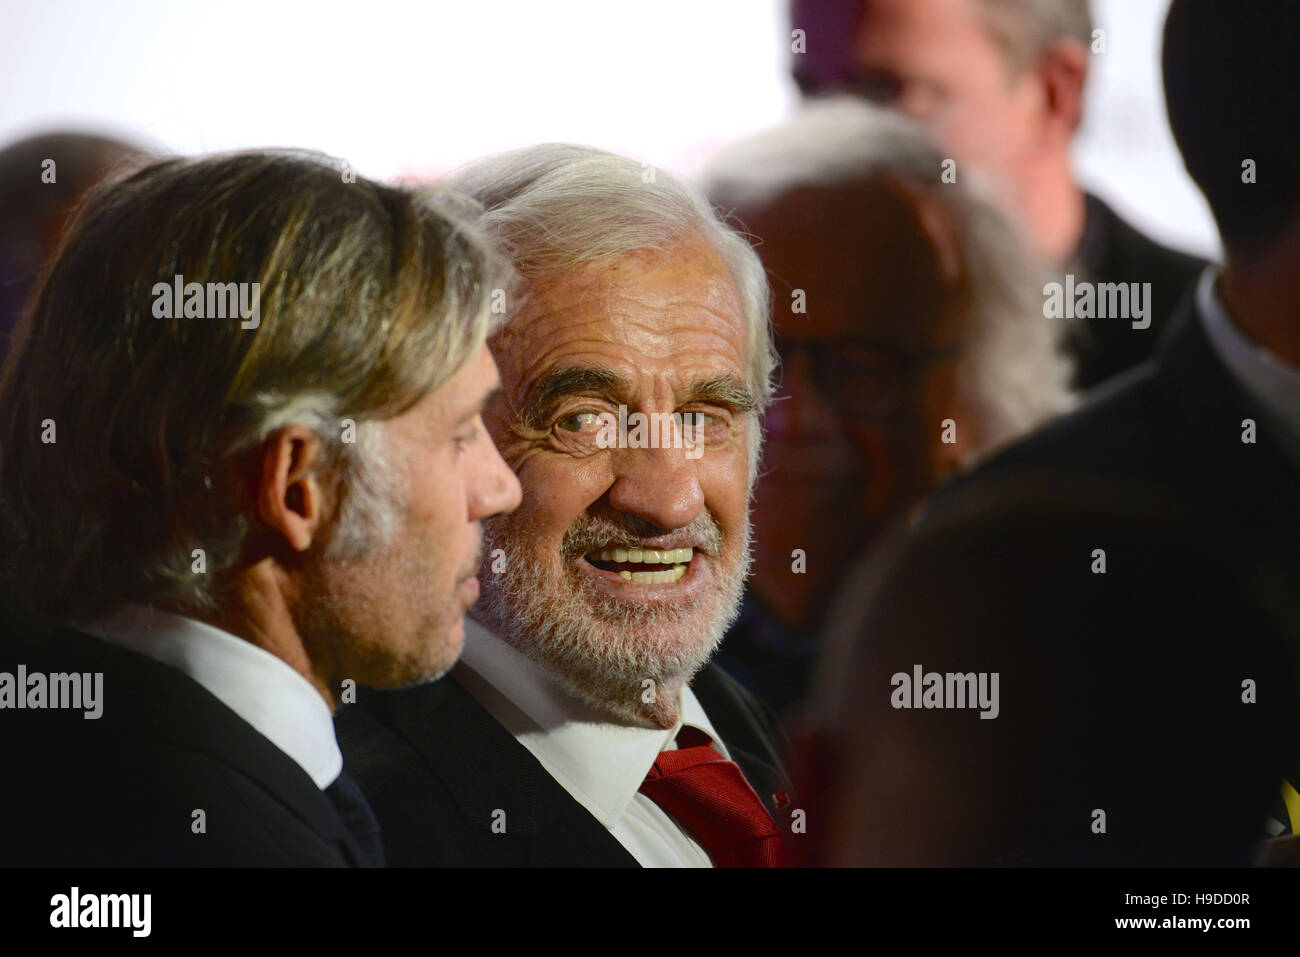 Lyon (south-eastern France), 2015/10/12: Jean-Paul Belmondo and his son Paul Belmondo attending the Grand Lyon Film Festival 'Lumière 2015' held from October 12 to18. Stock Photo